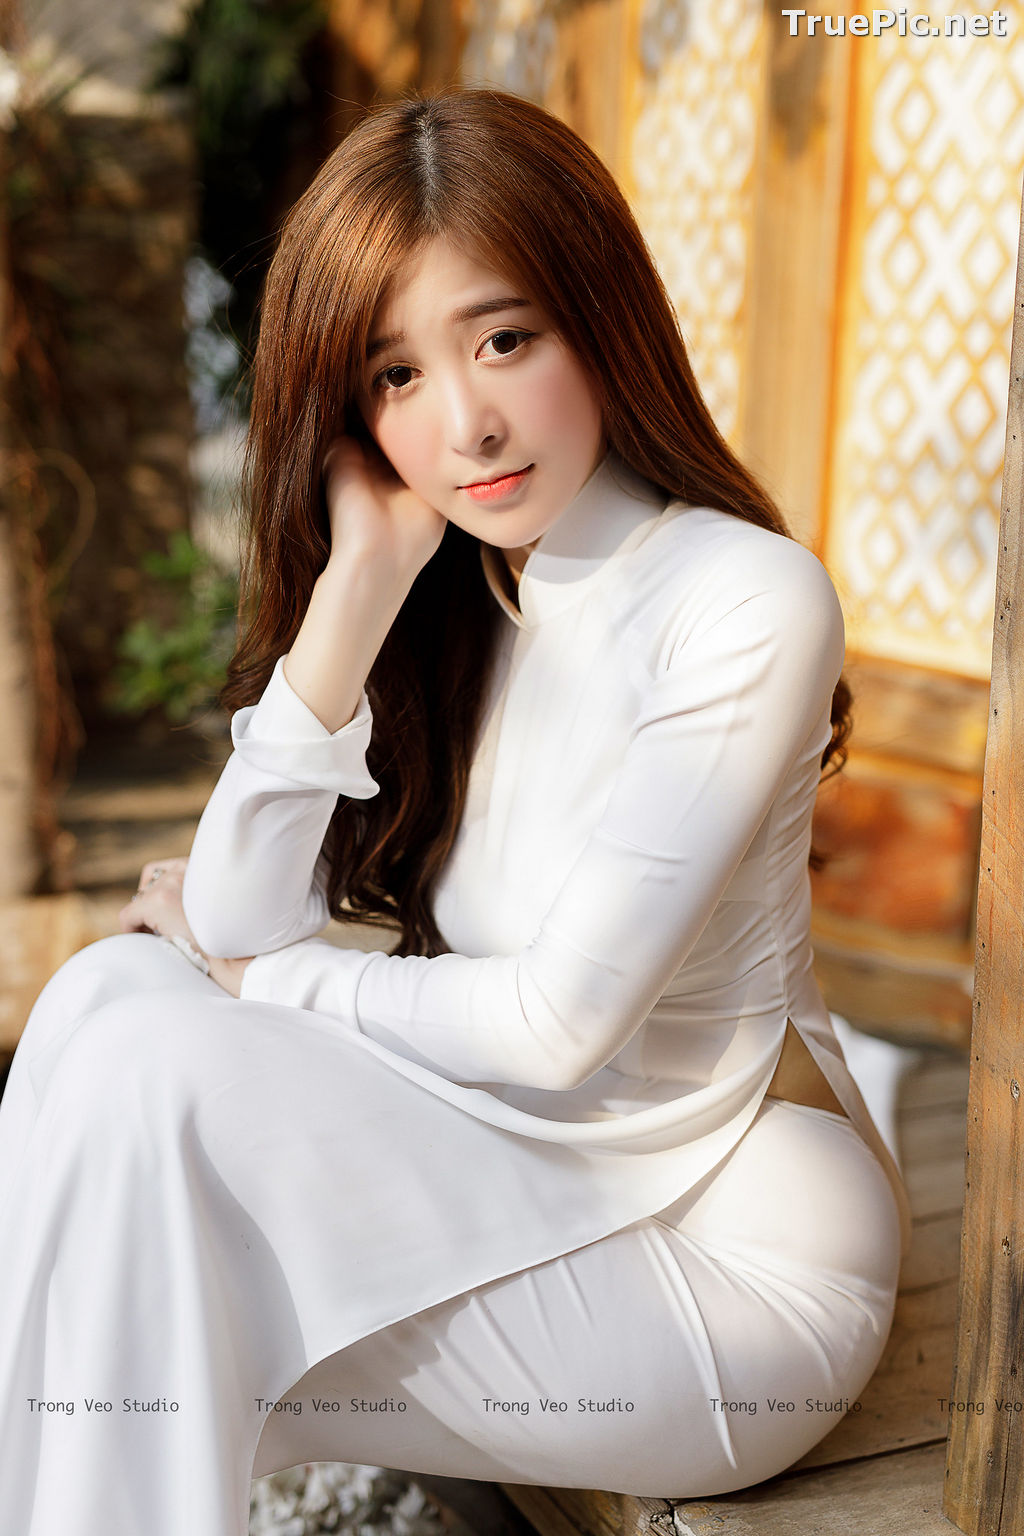 The Beauty of Vietnamese Girls with Traditional Dress (Ao Dai) #4